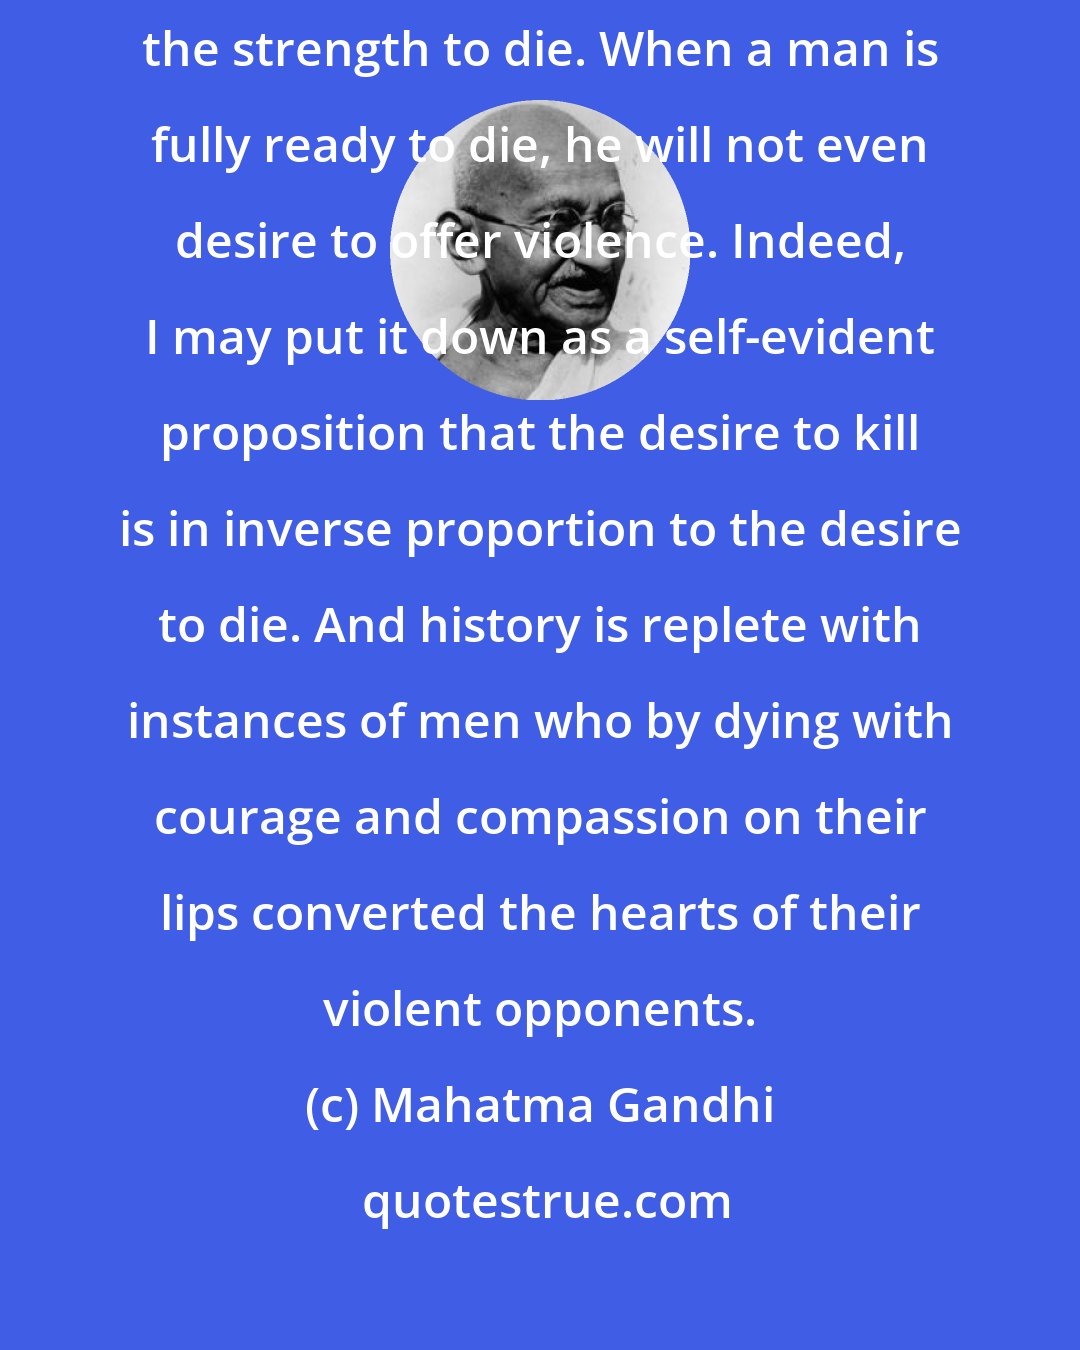 Mahatma Gandhi: The strength to kill is not essential for self-defense; one ought to have the strength to die. When a man is fully ready to die, he will not even desire to offer violence. Indeed, I may put it down as a self-evident proposition that the desire to kill is in inverse proportion to the desire to die. And history is replete with instances of men who by dying with courage and compassion on their lips converted the hearts of their violent opponents.